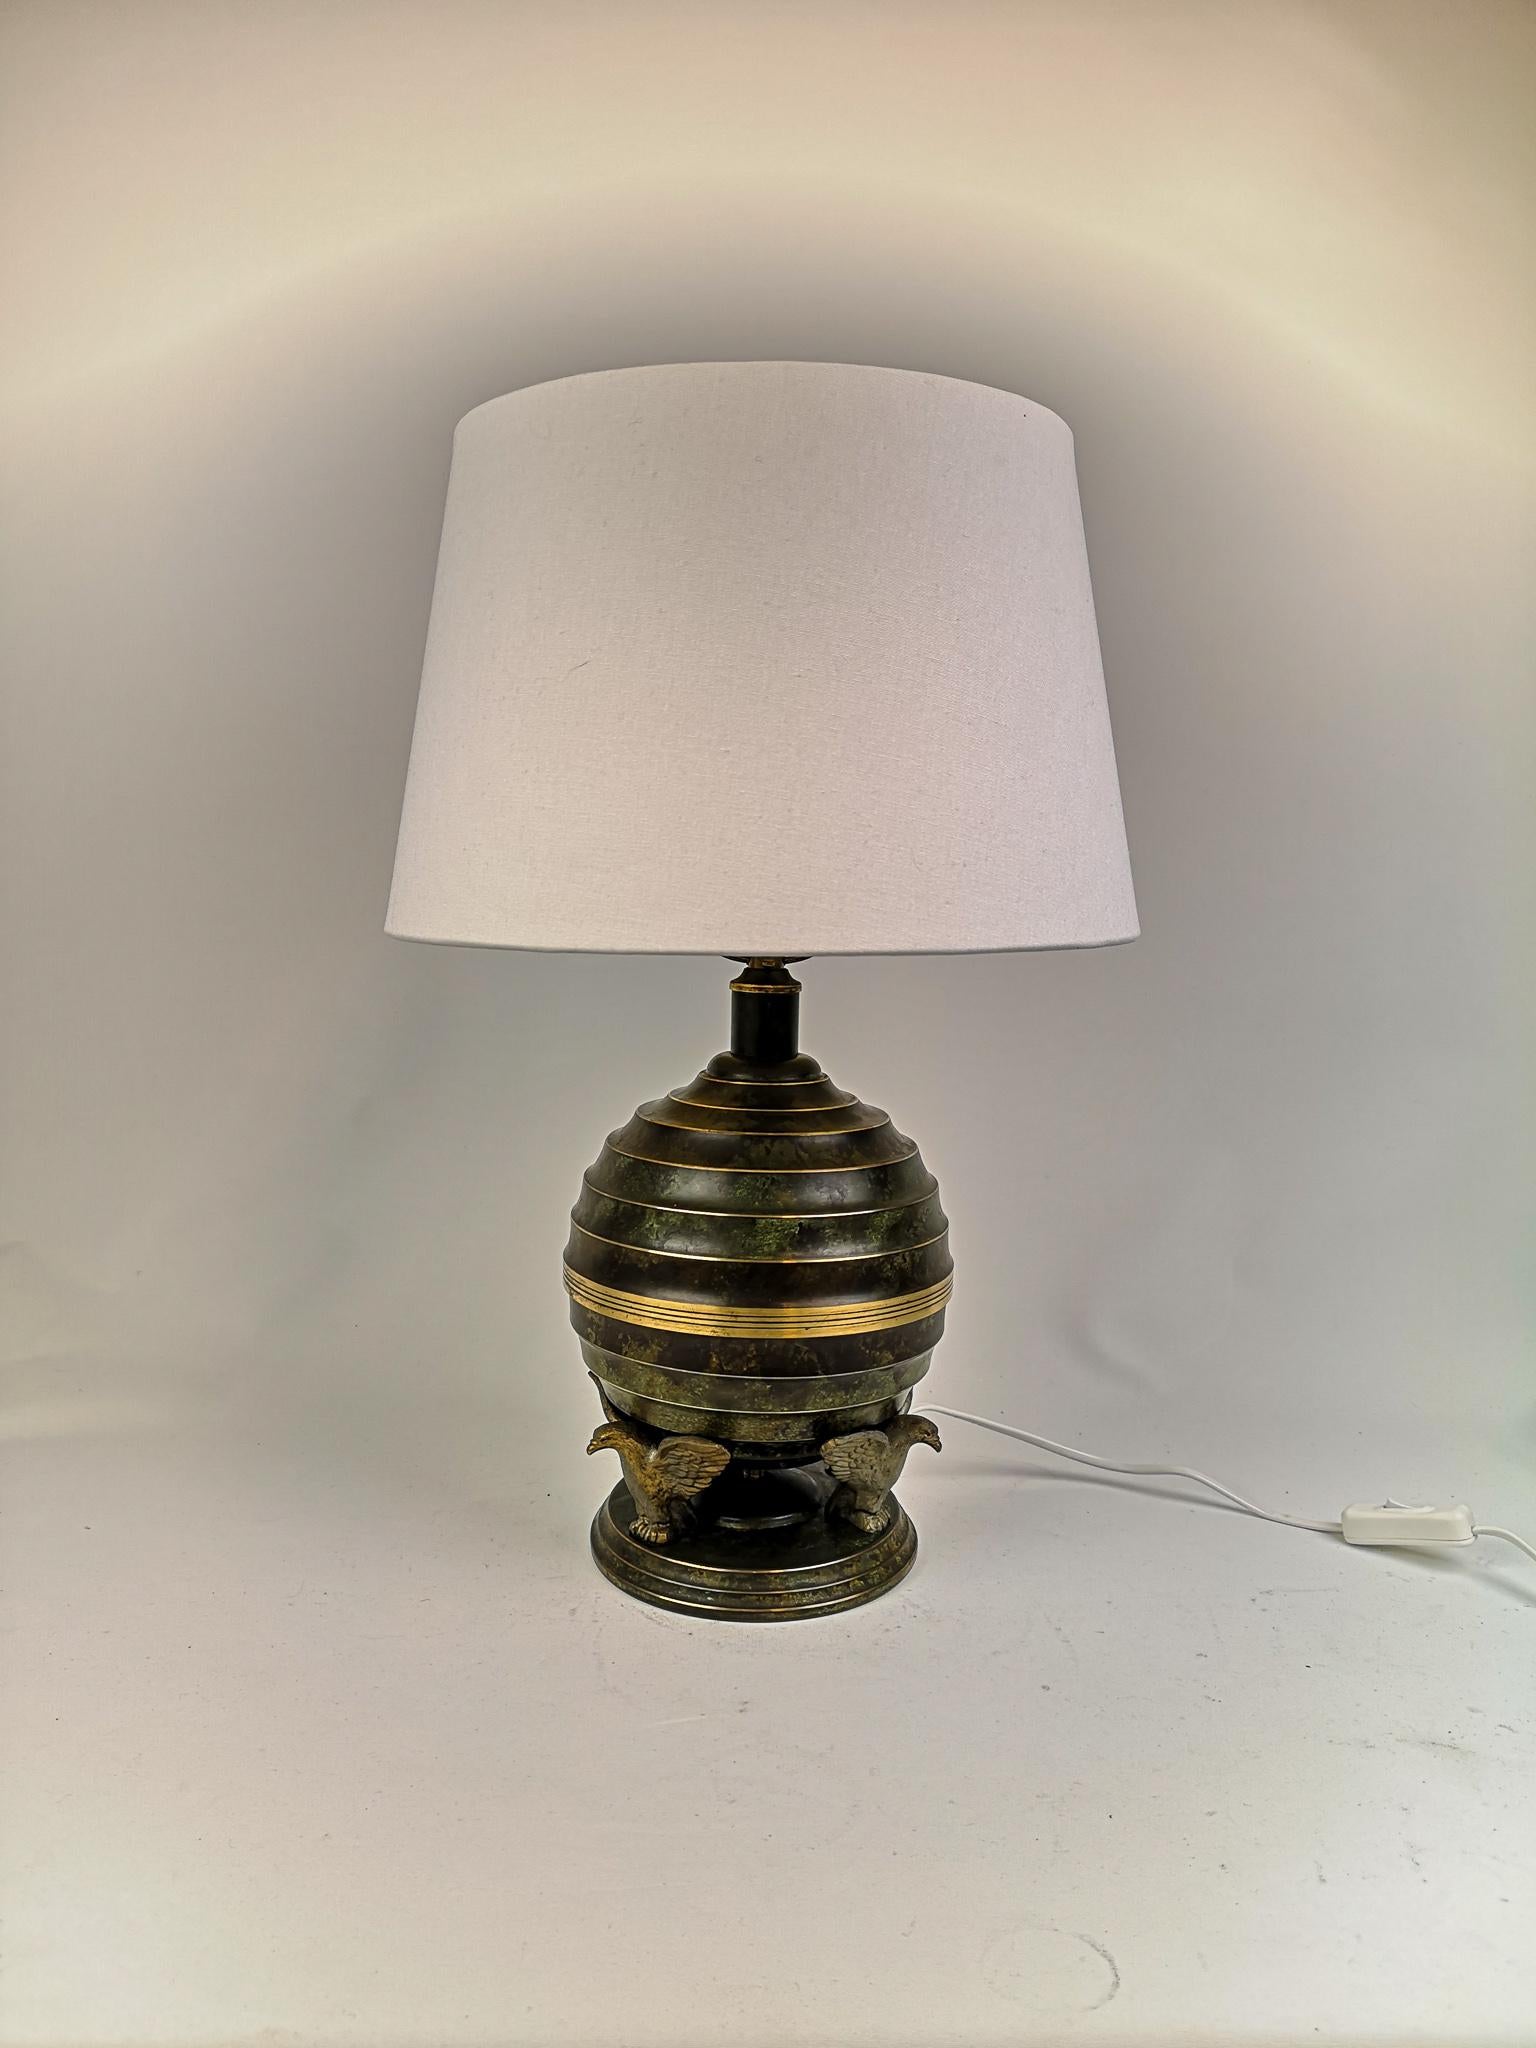 Wonderful table lamp made in Sweden. The lamp itself is made by SVM. It’s in patinated bronze and brass. The Art Deco round base is carried by three eagles.

It’s in good and working condition. Rewired. This is not the original shade.